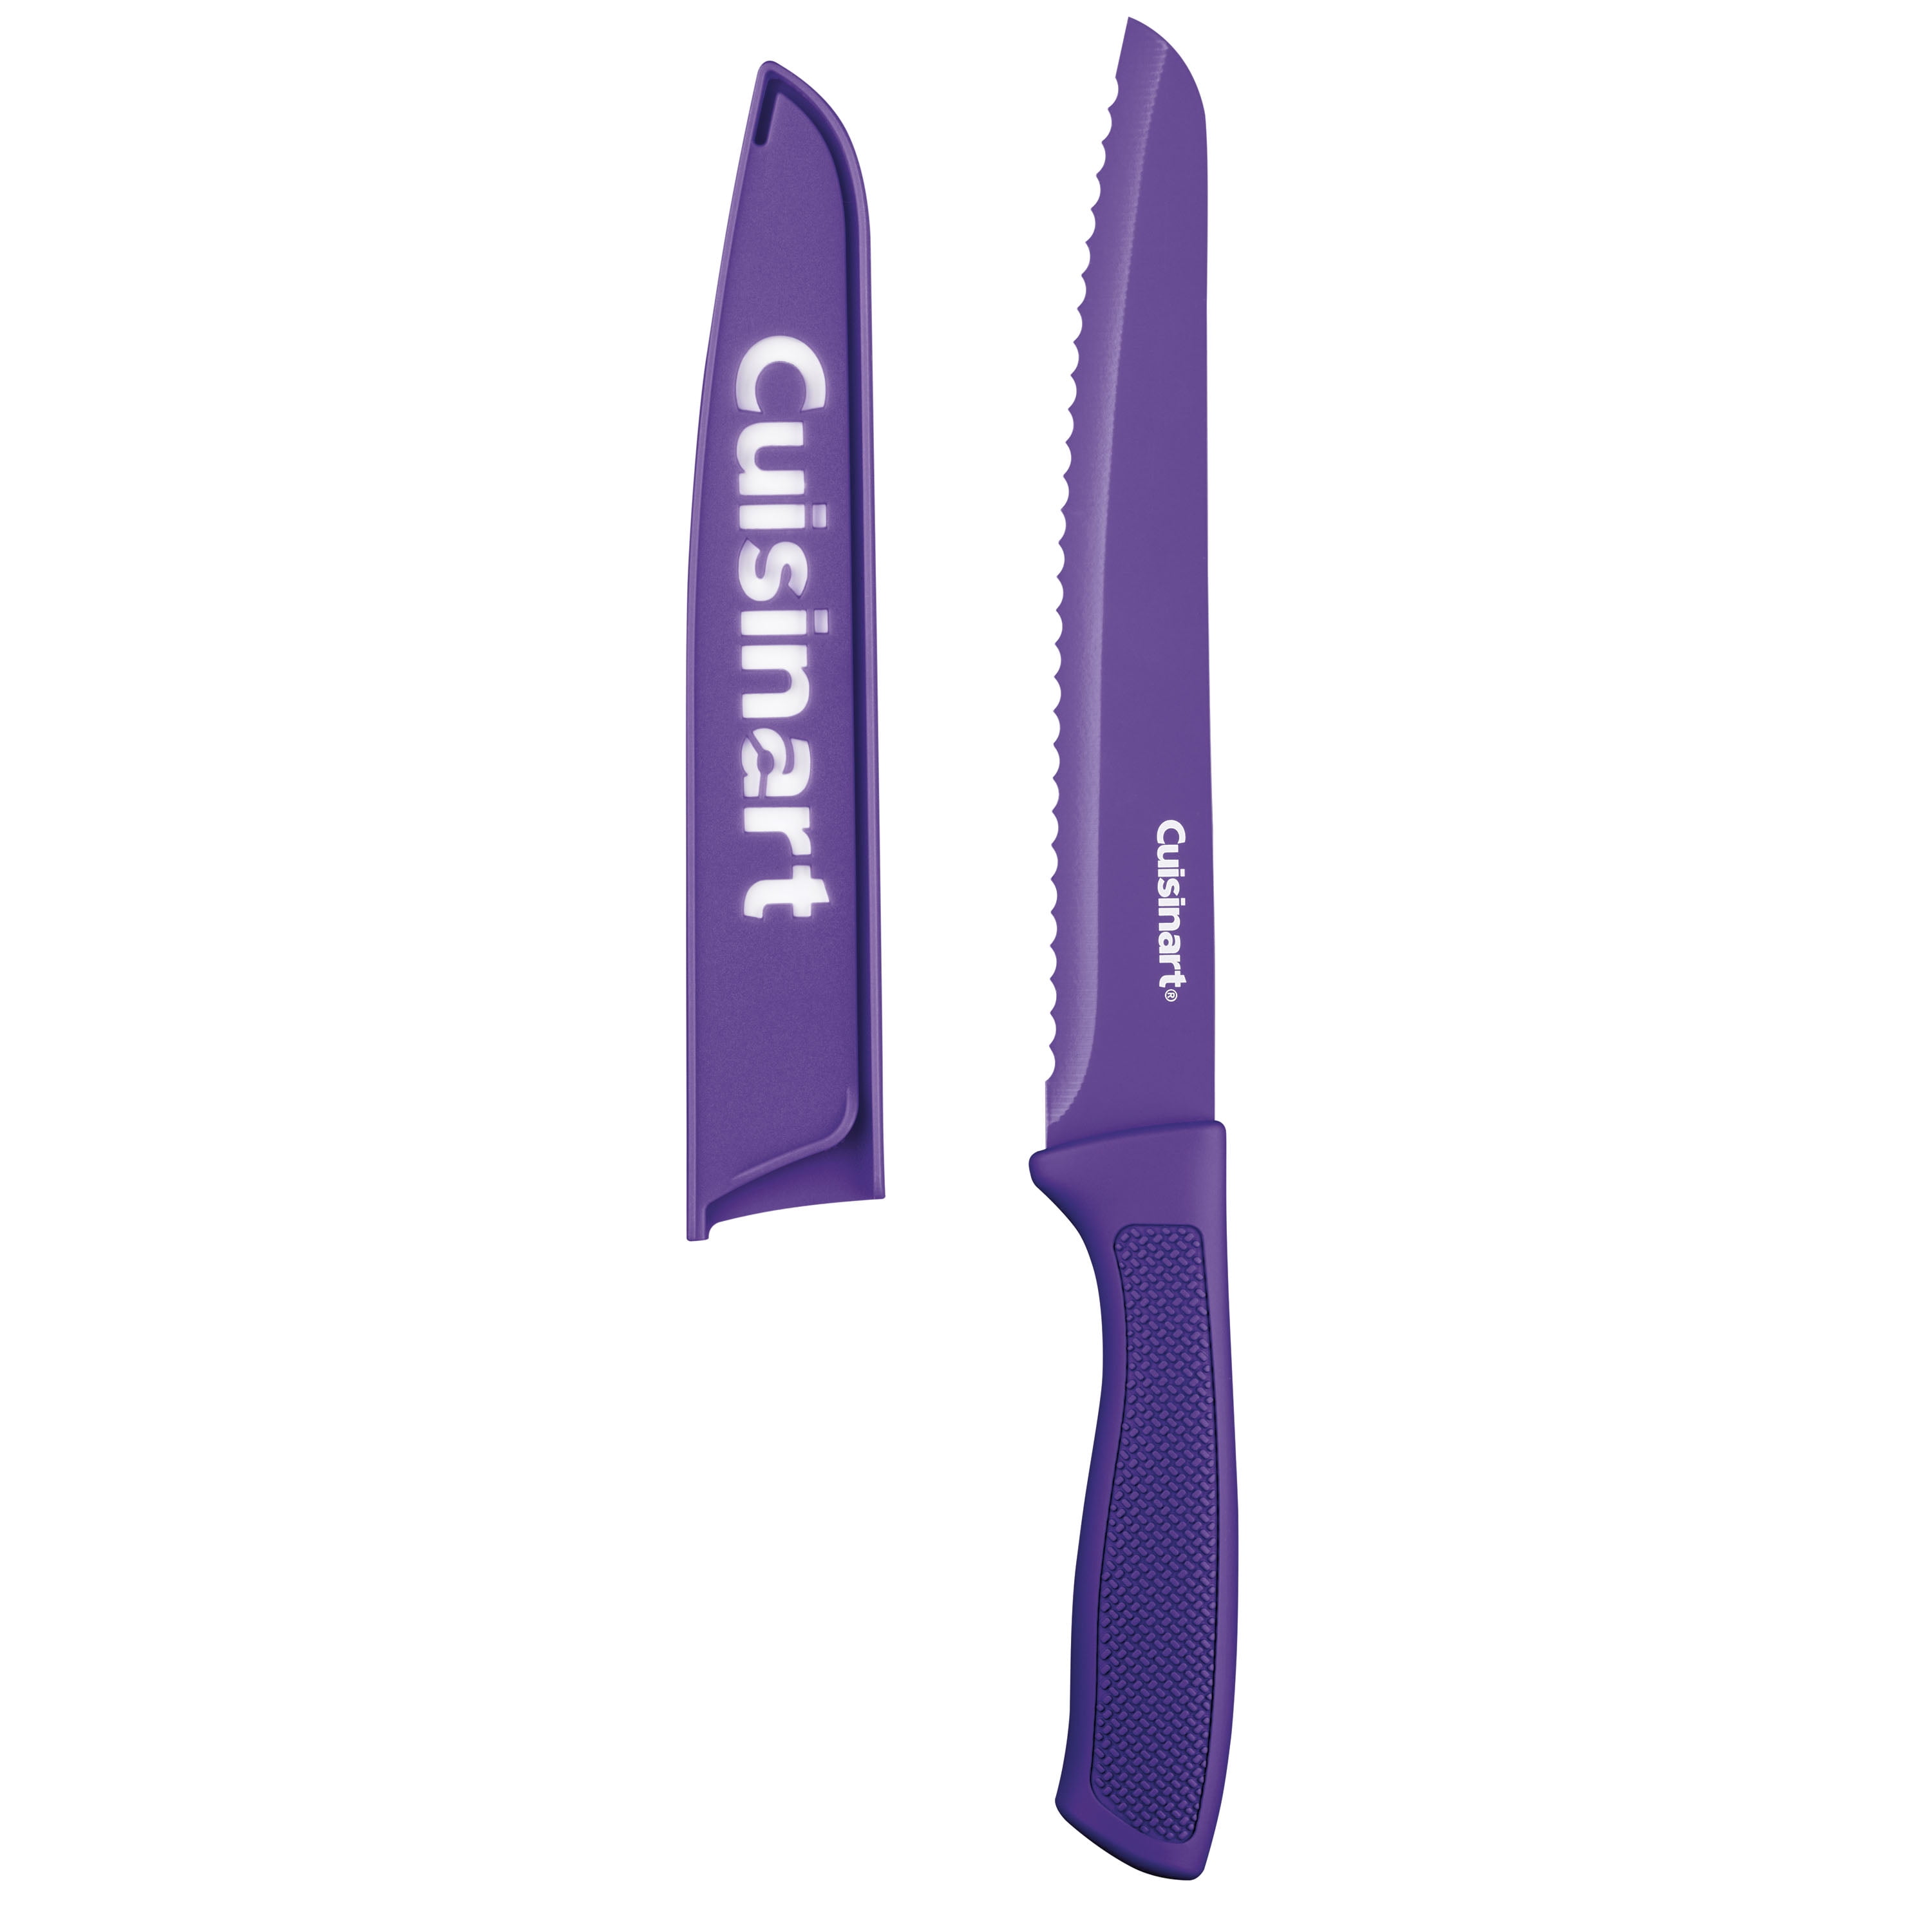 Cuisinart 12-Piece Ceramic Coated Color Knife Set with Blade Guards -  Includes Chef, Slicing, Bread, Santoku, Utility, Paring Knives - Multiple  Colors in the Cutlery department at